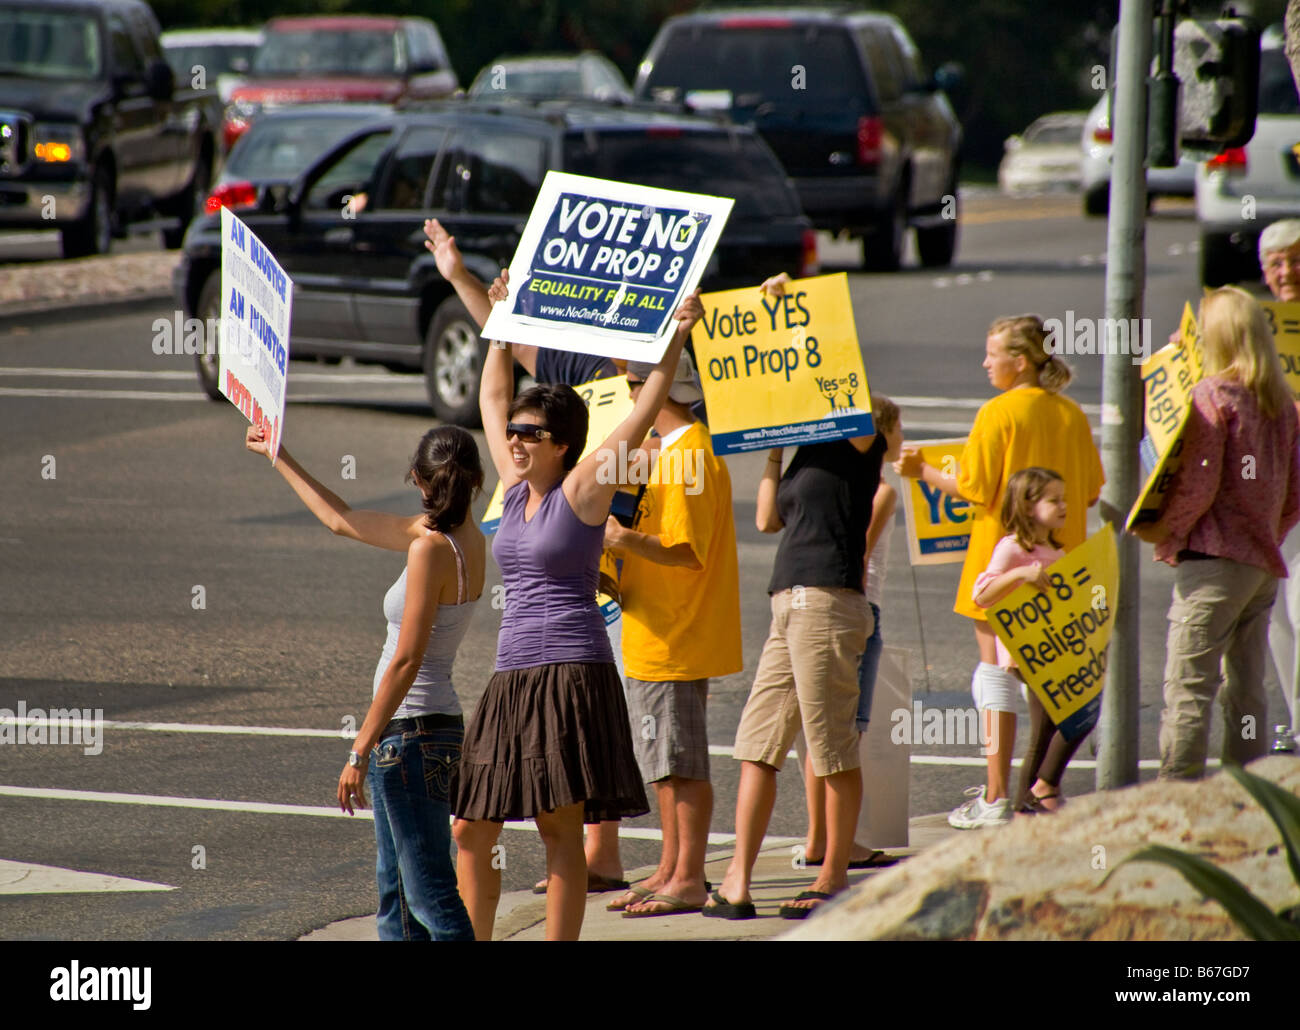 Demonstrators protest against state ballot proposition at Pacific Coast Highway in Laguna Niguel, CA, USA Stock Photo